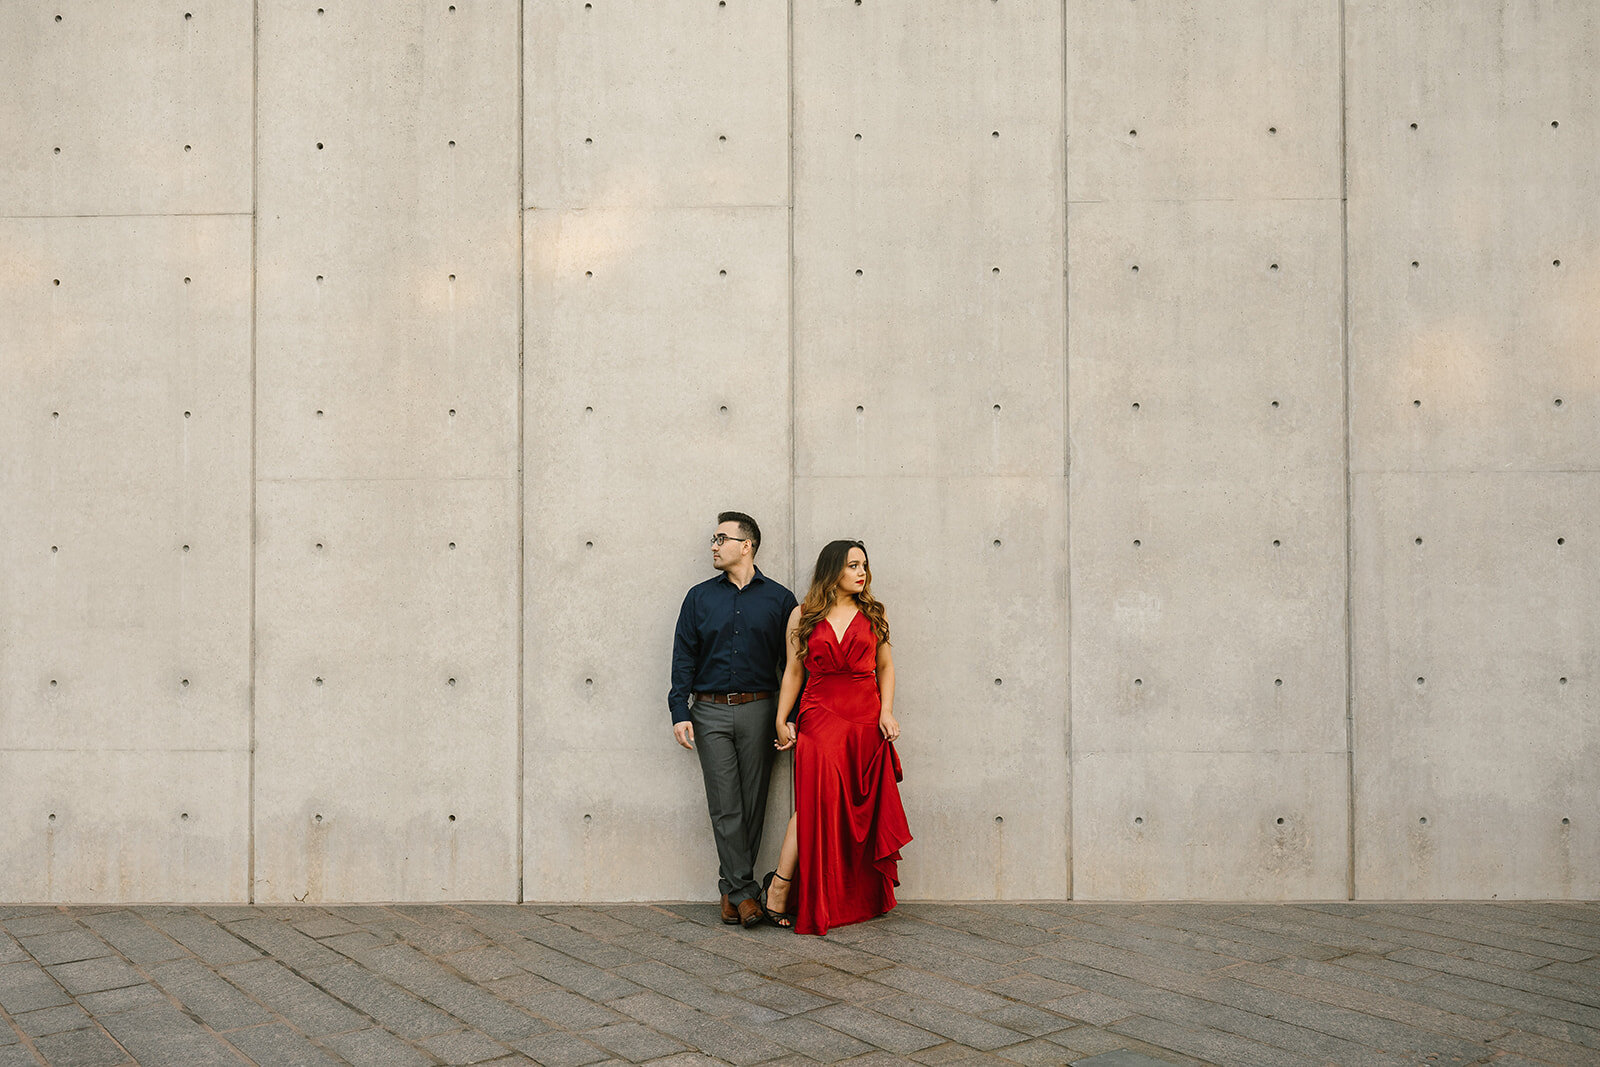 Kori+Tommy_Memorial Park and Downtown Houston Engagements_36